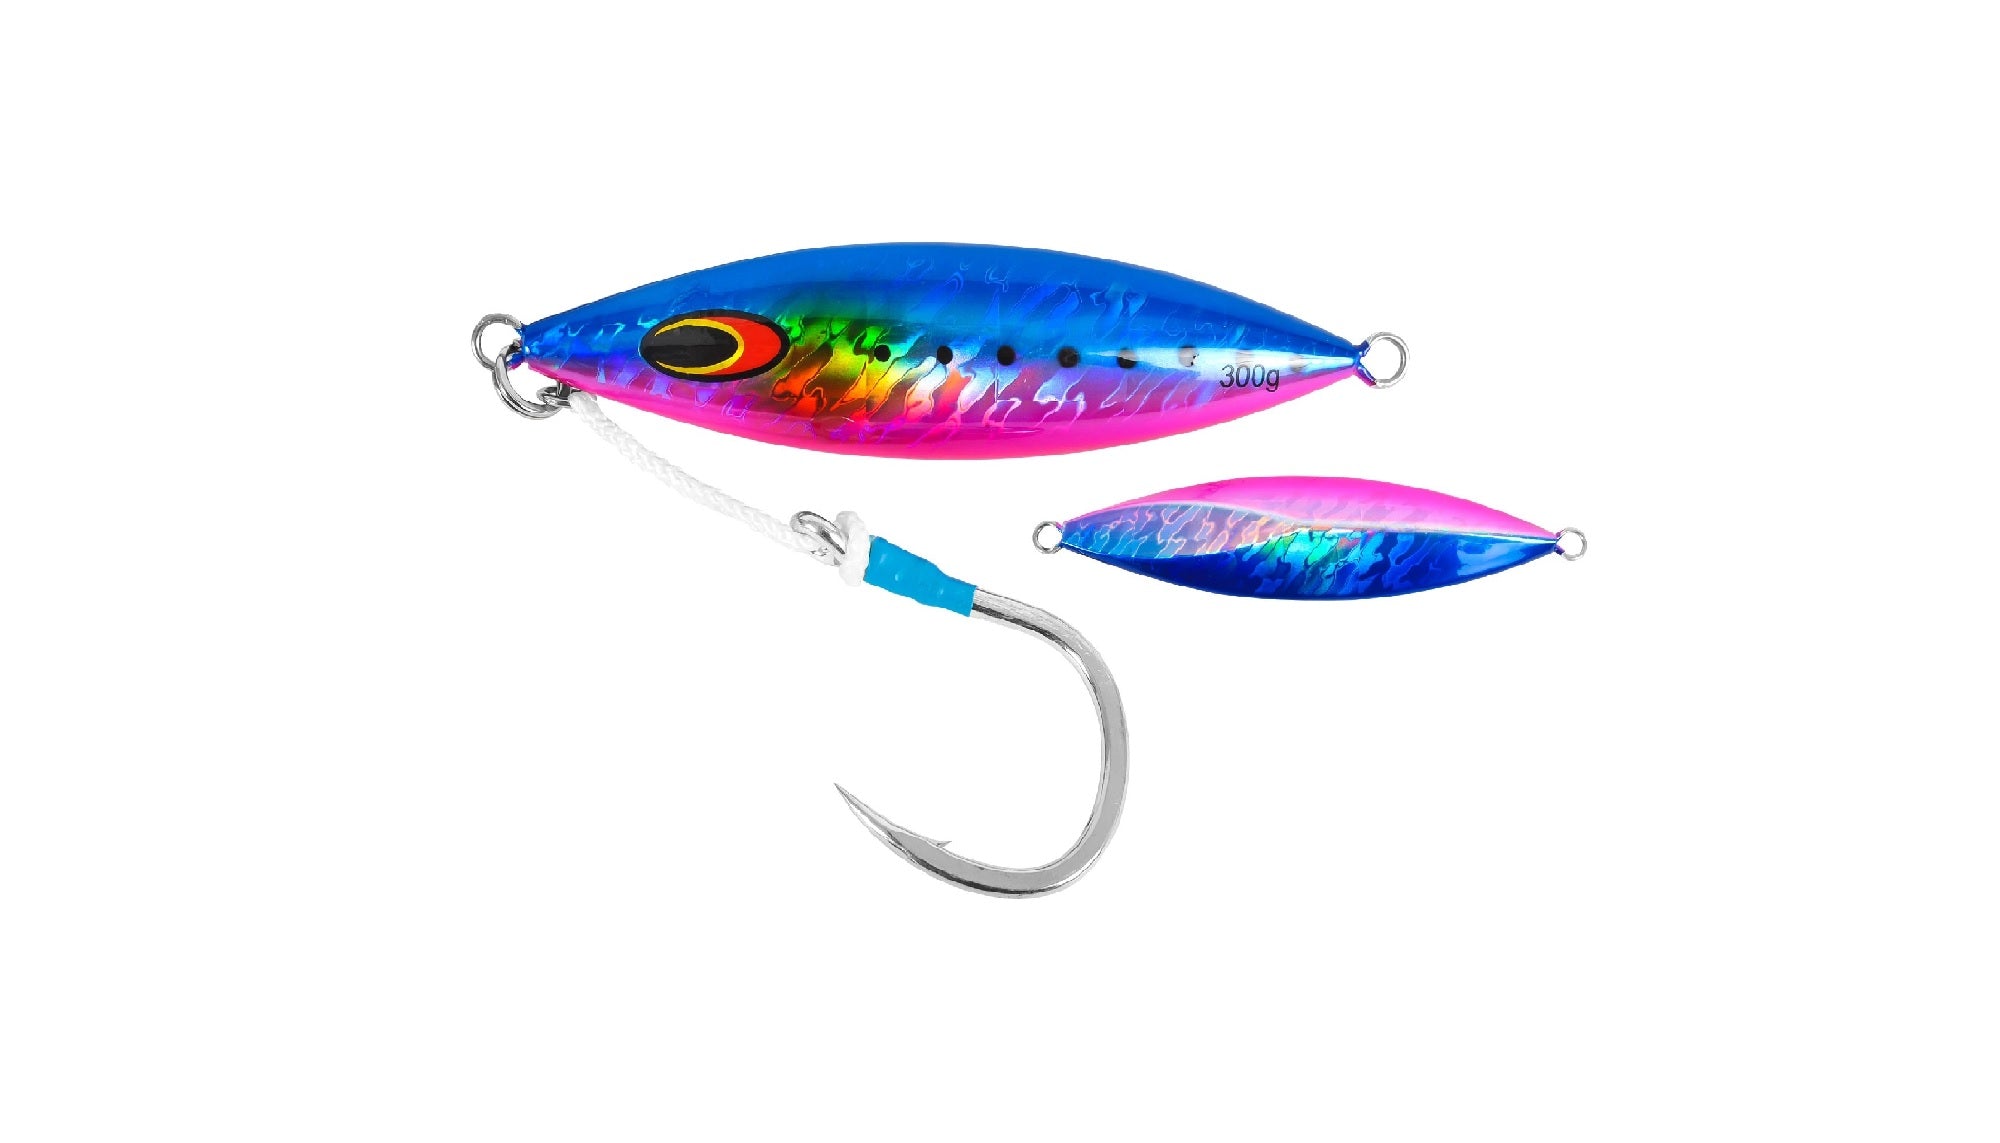 Nomad Gypsy Jig (60g-120g, Multiple Colors)